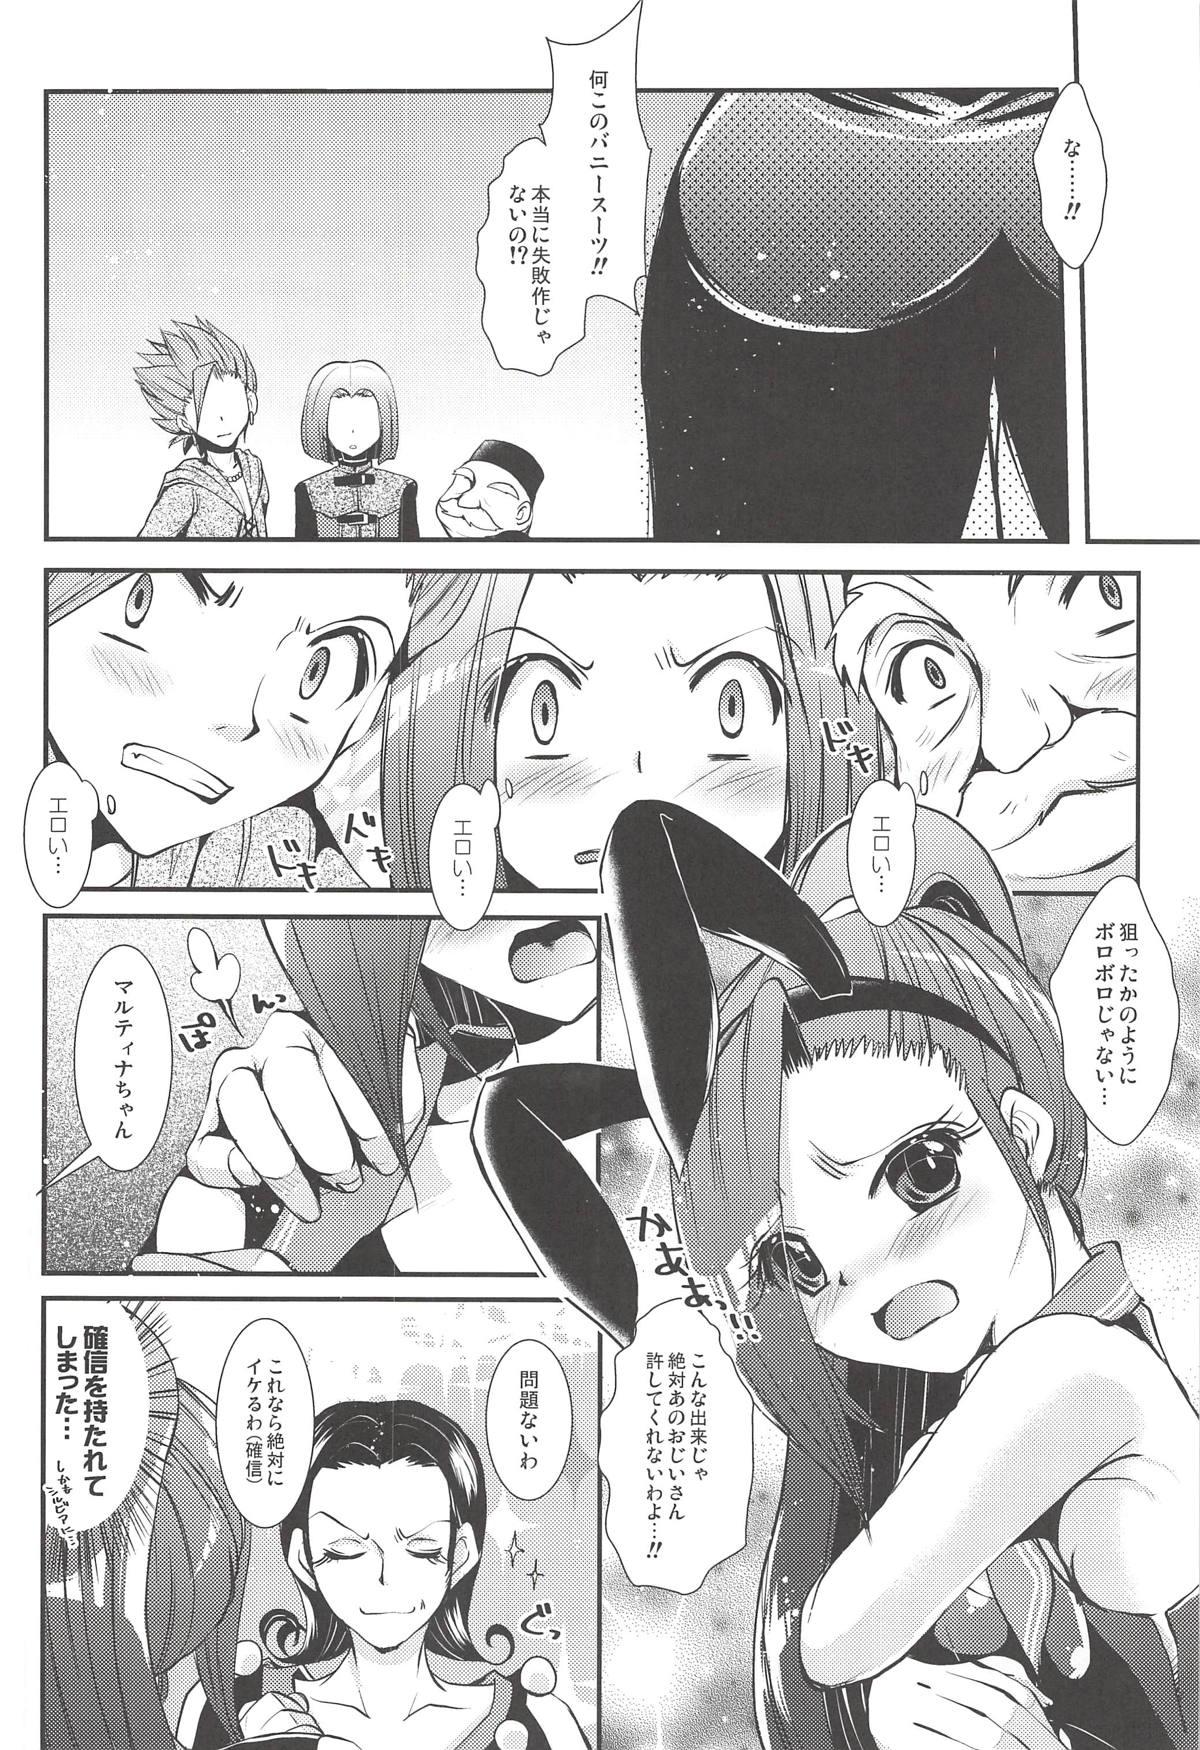 Blow Jobs Porn Shippai Bunny - Failure of Bunny Suit - Dragon quest xi Tiny - Page 7